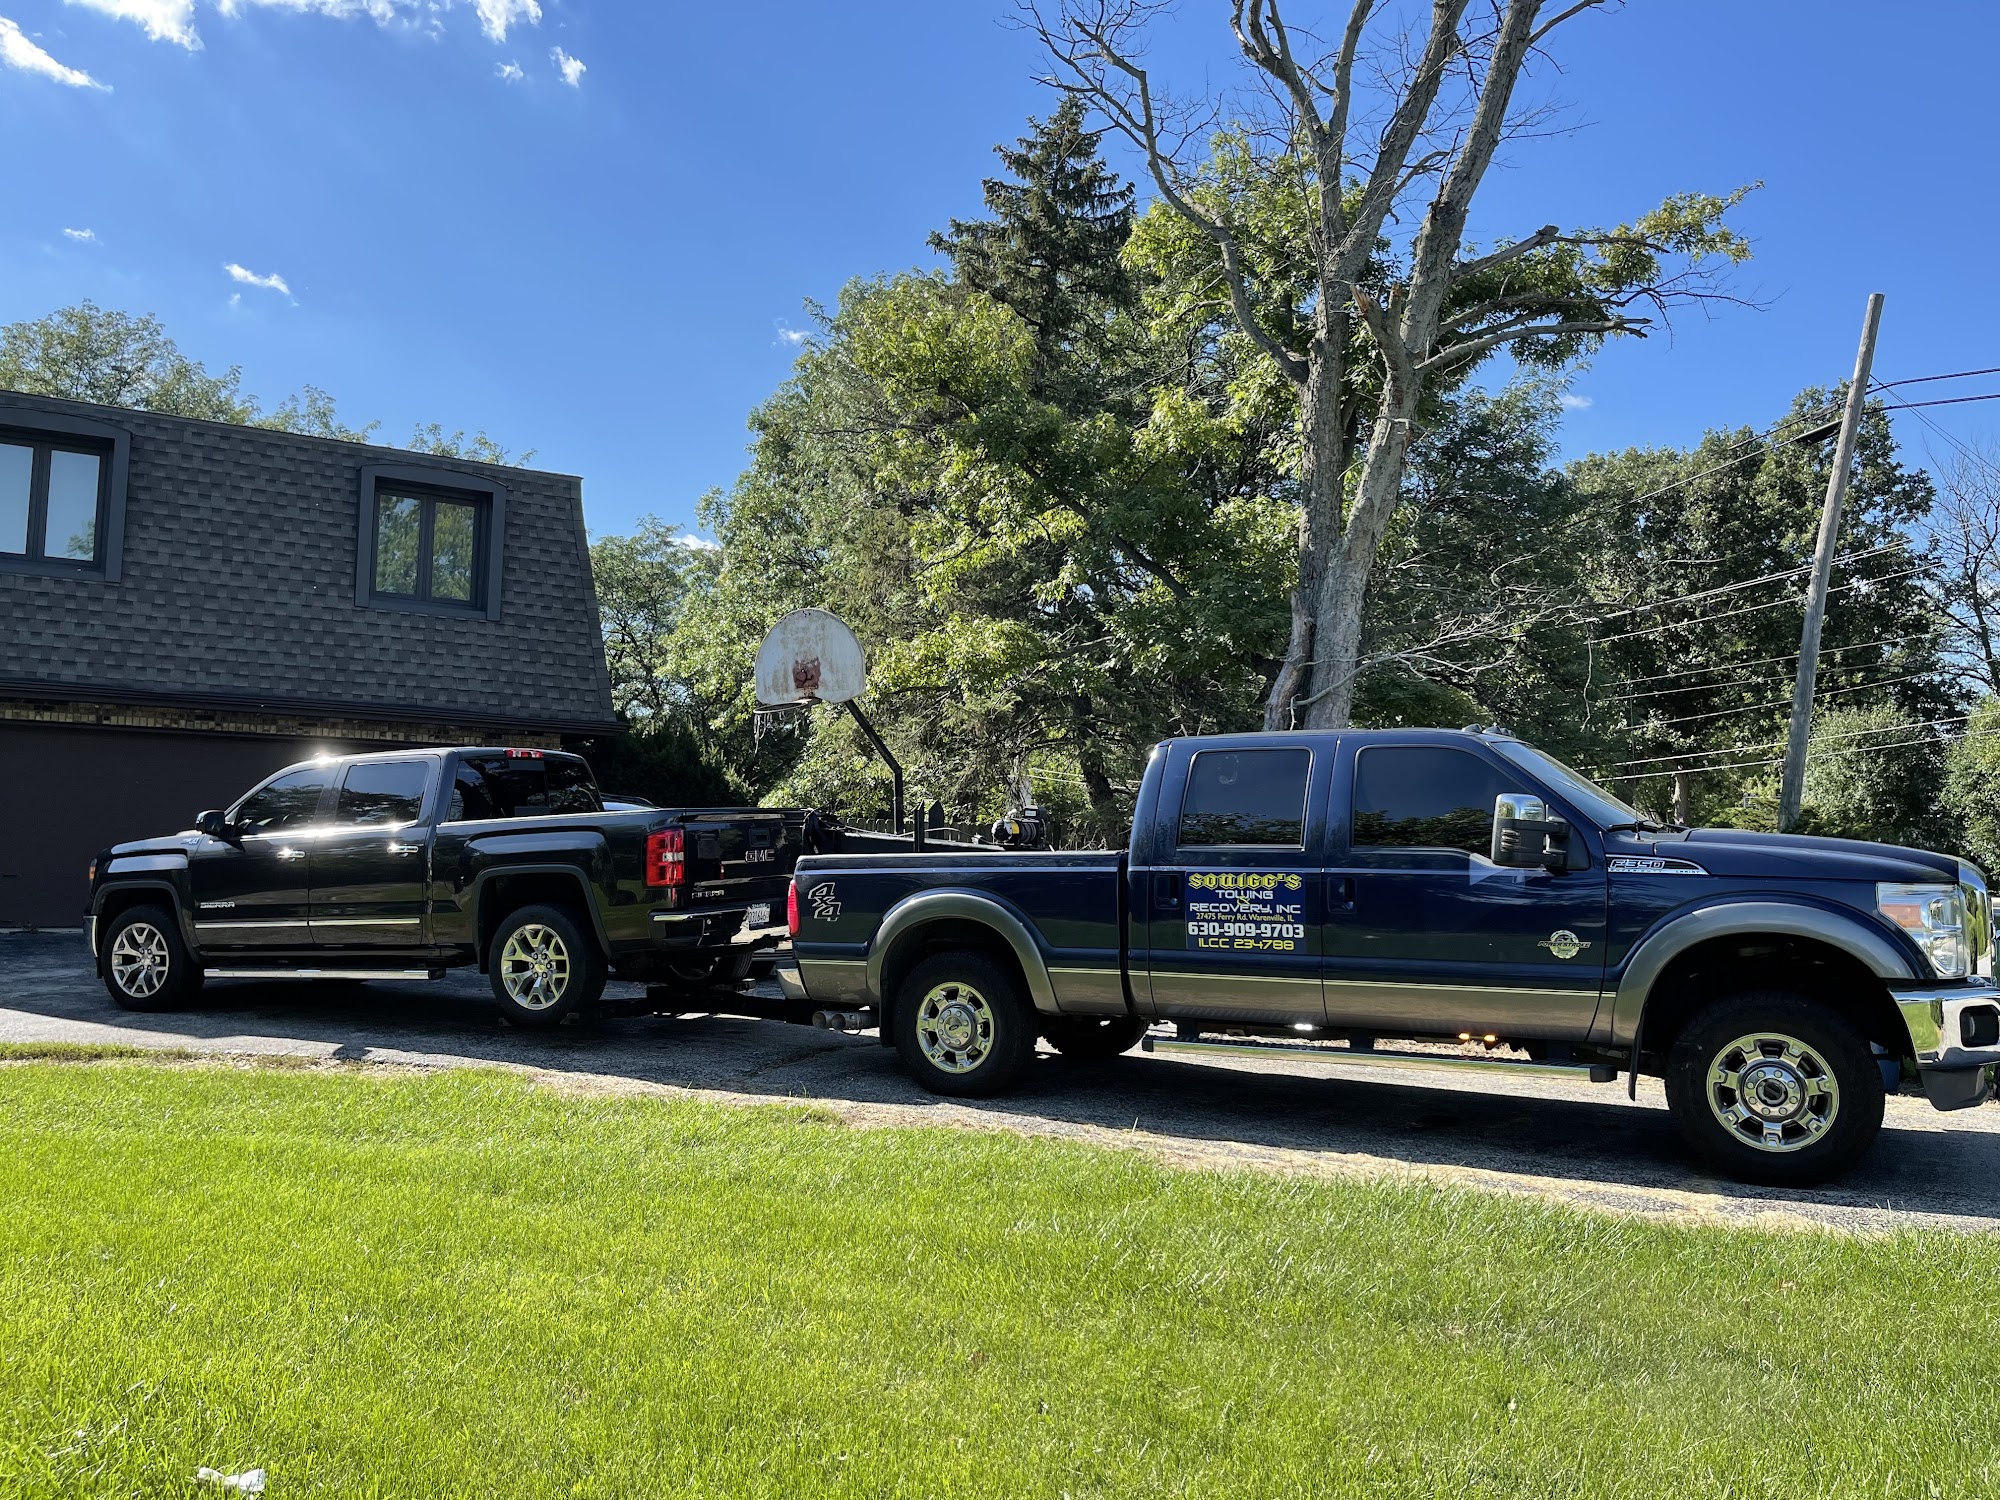 Squigg's Towing & Recovery